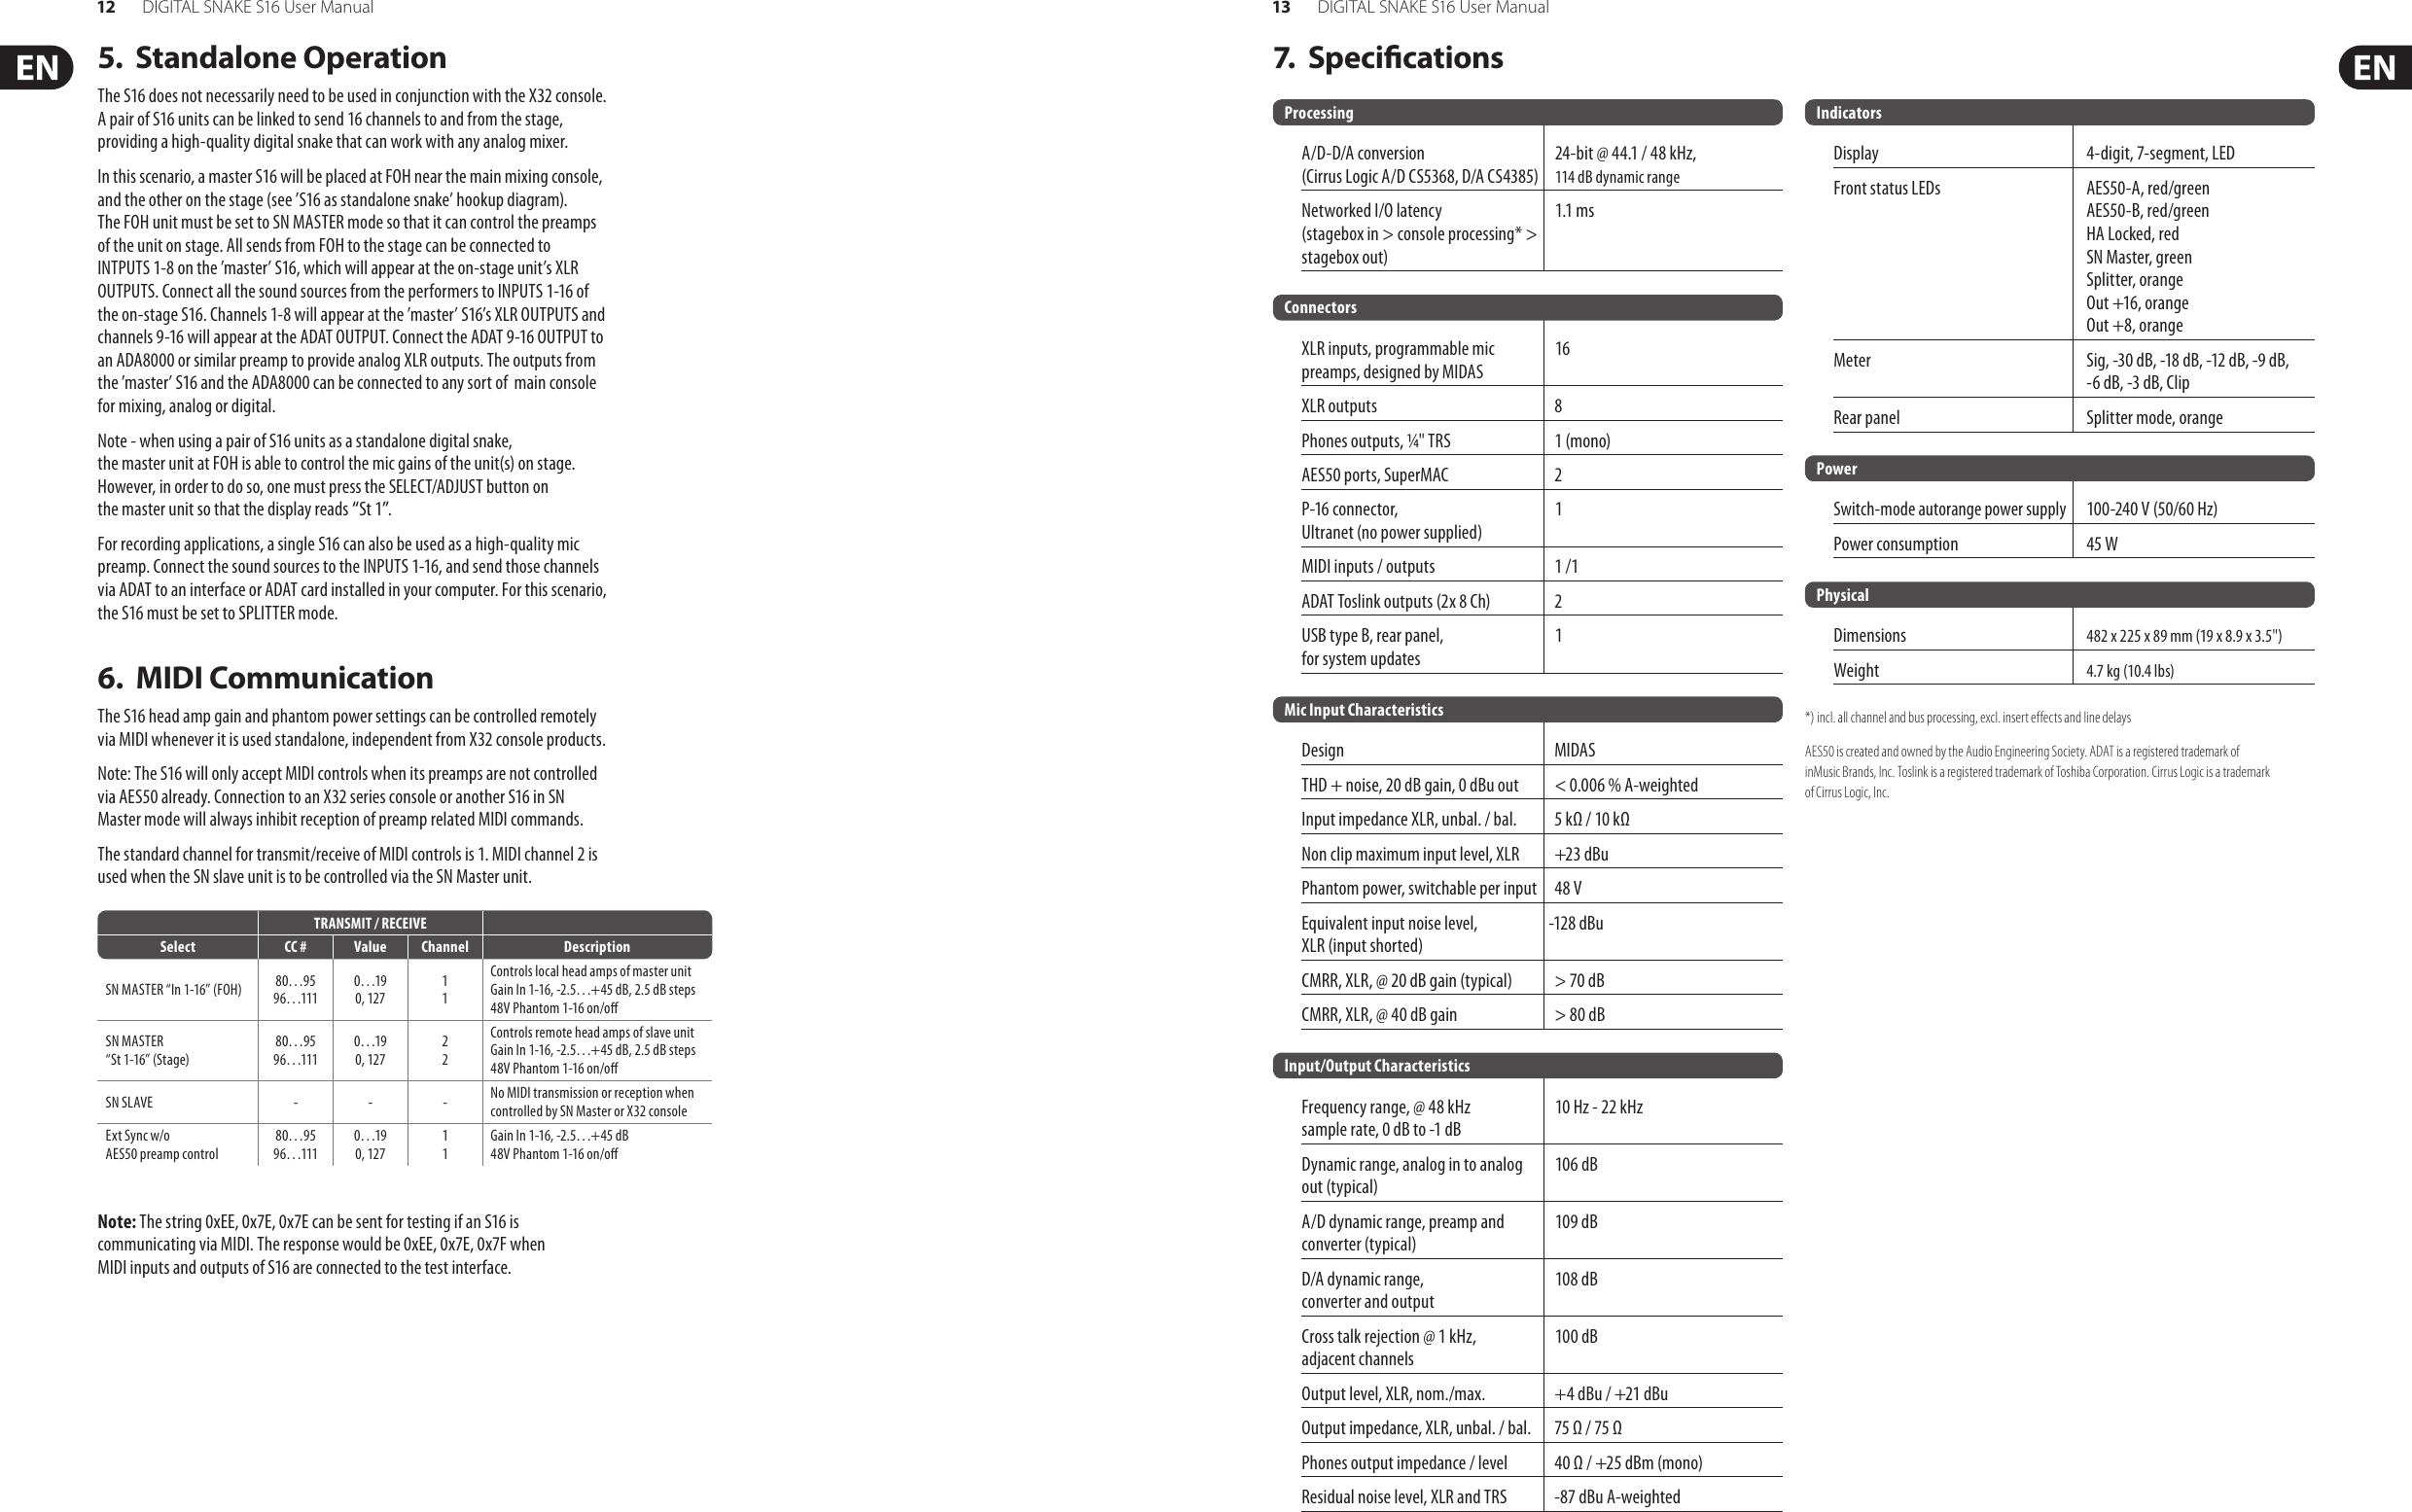 Page 7 of 9 - Behringer Behringer-S16-Users-Manual- DIGITAL SNAKE S16  Behringer-s16-users-manual